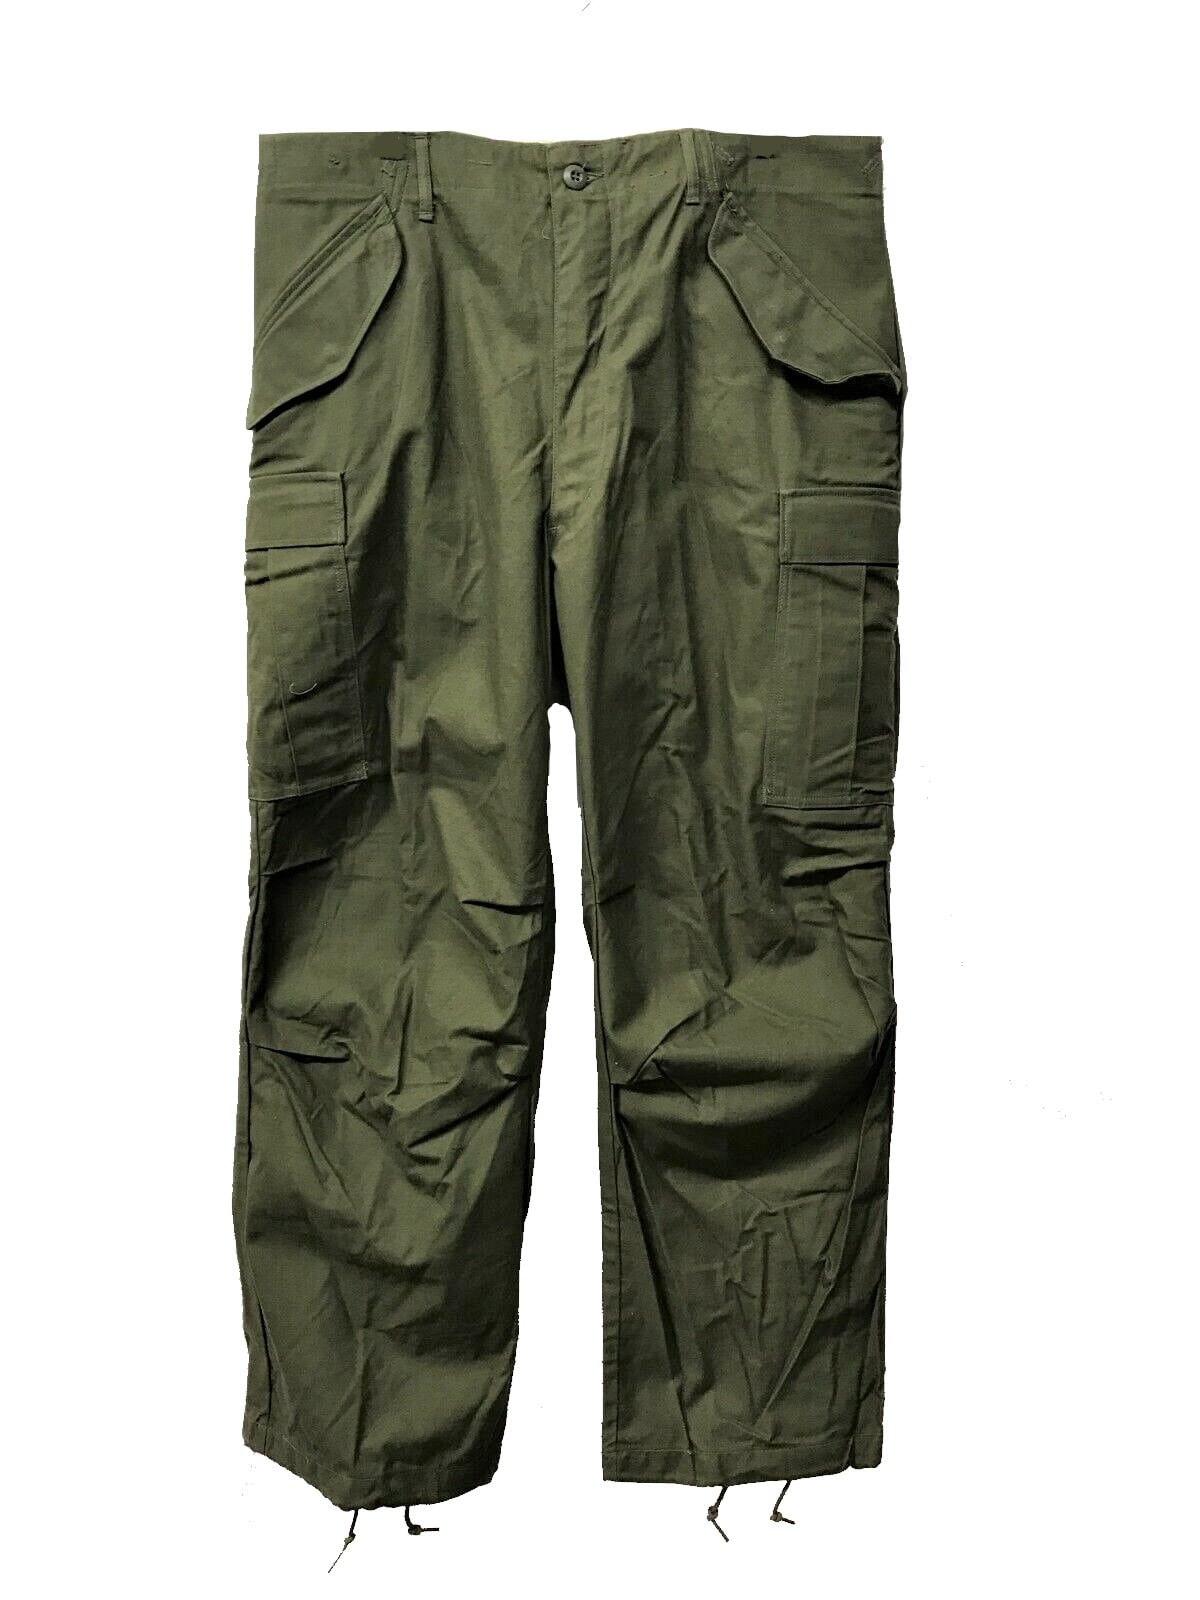 US OD NYCO M65 FIELD PANTS OD, Apparel \ Pants \ Field Pants  , Army Navy Surplus - Tactical, Big variety - Cheap  prices